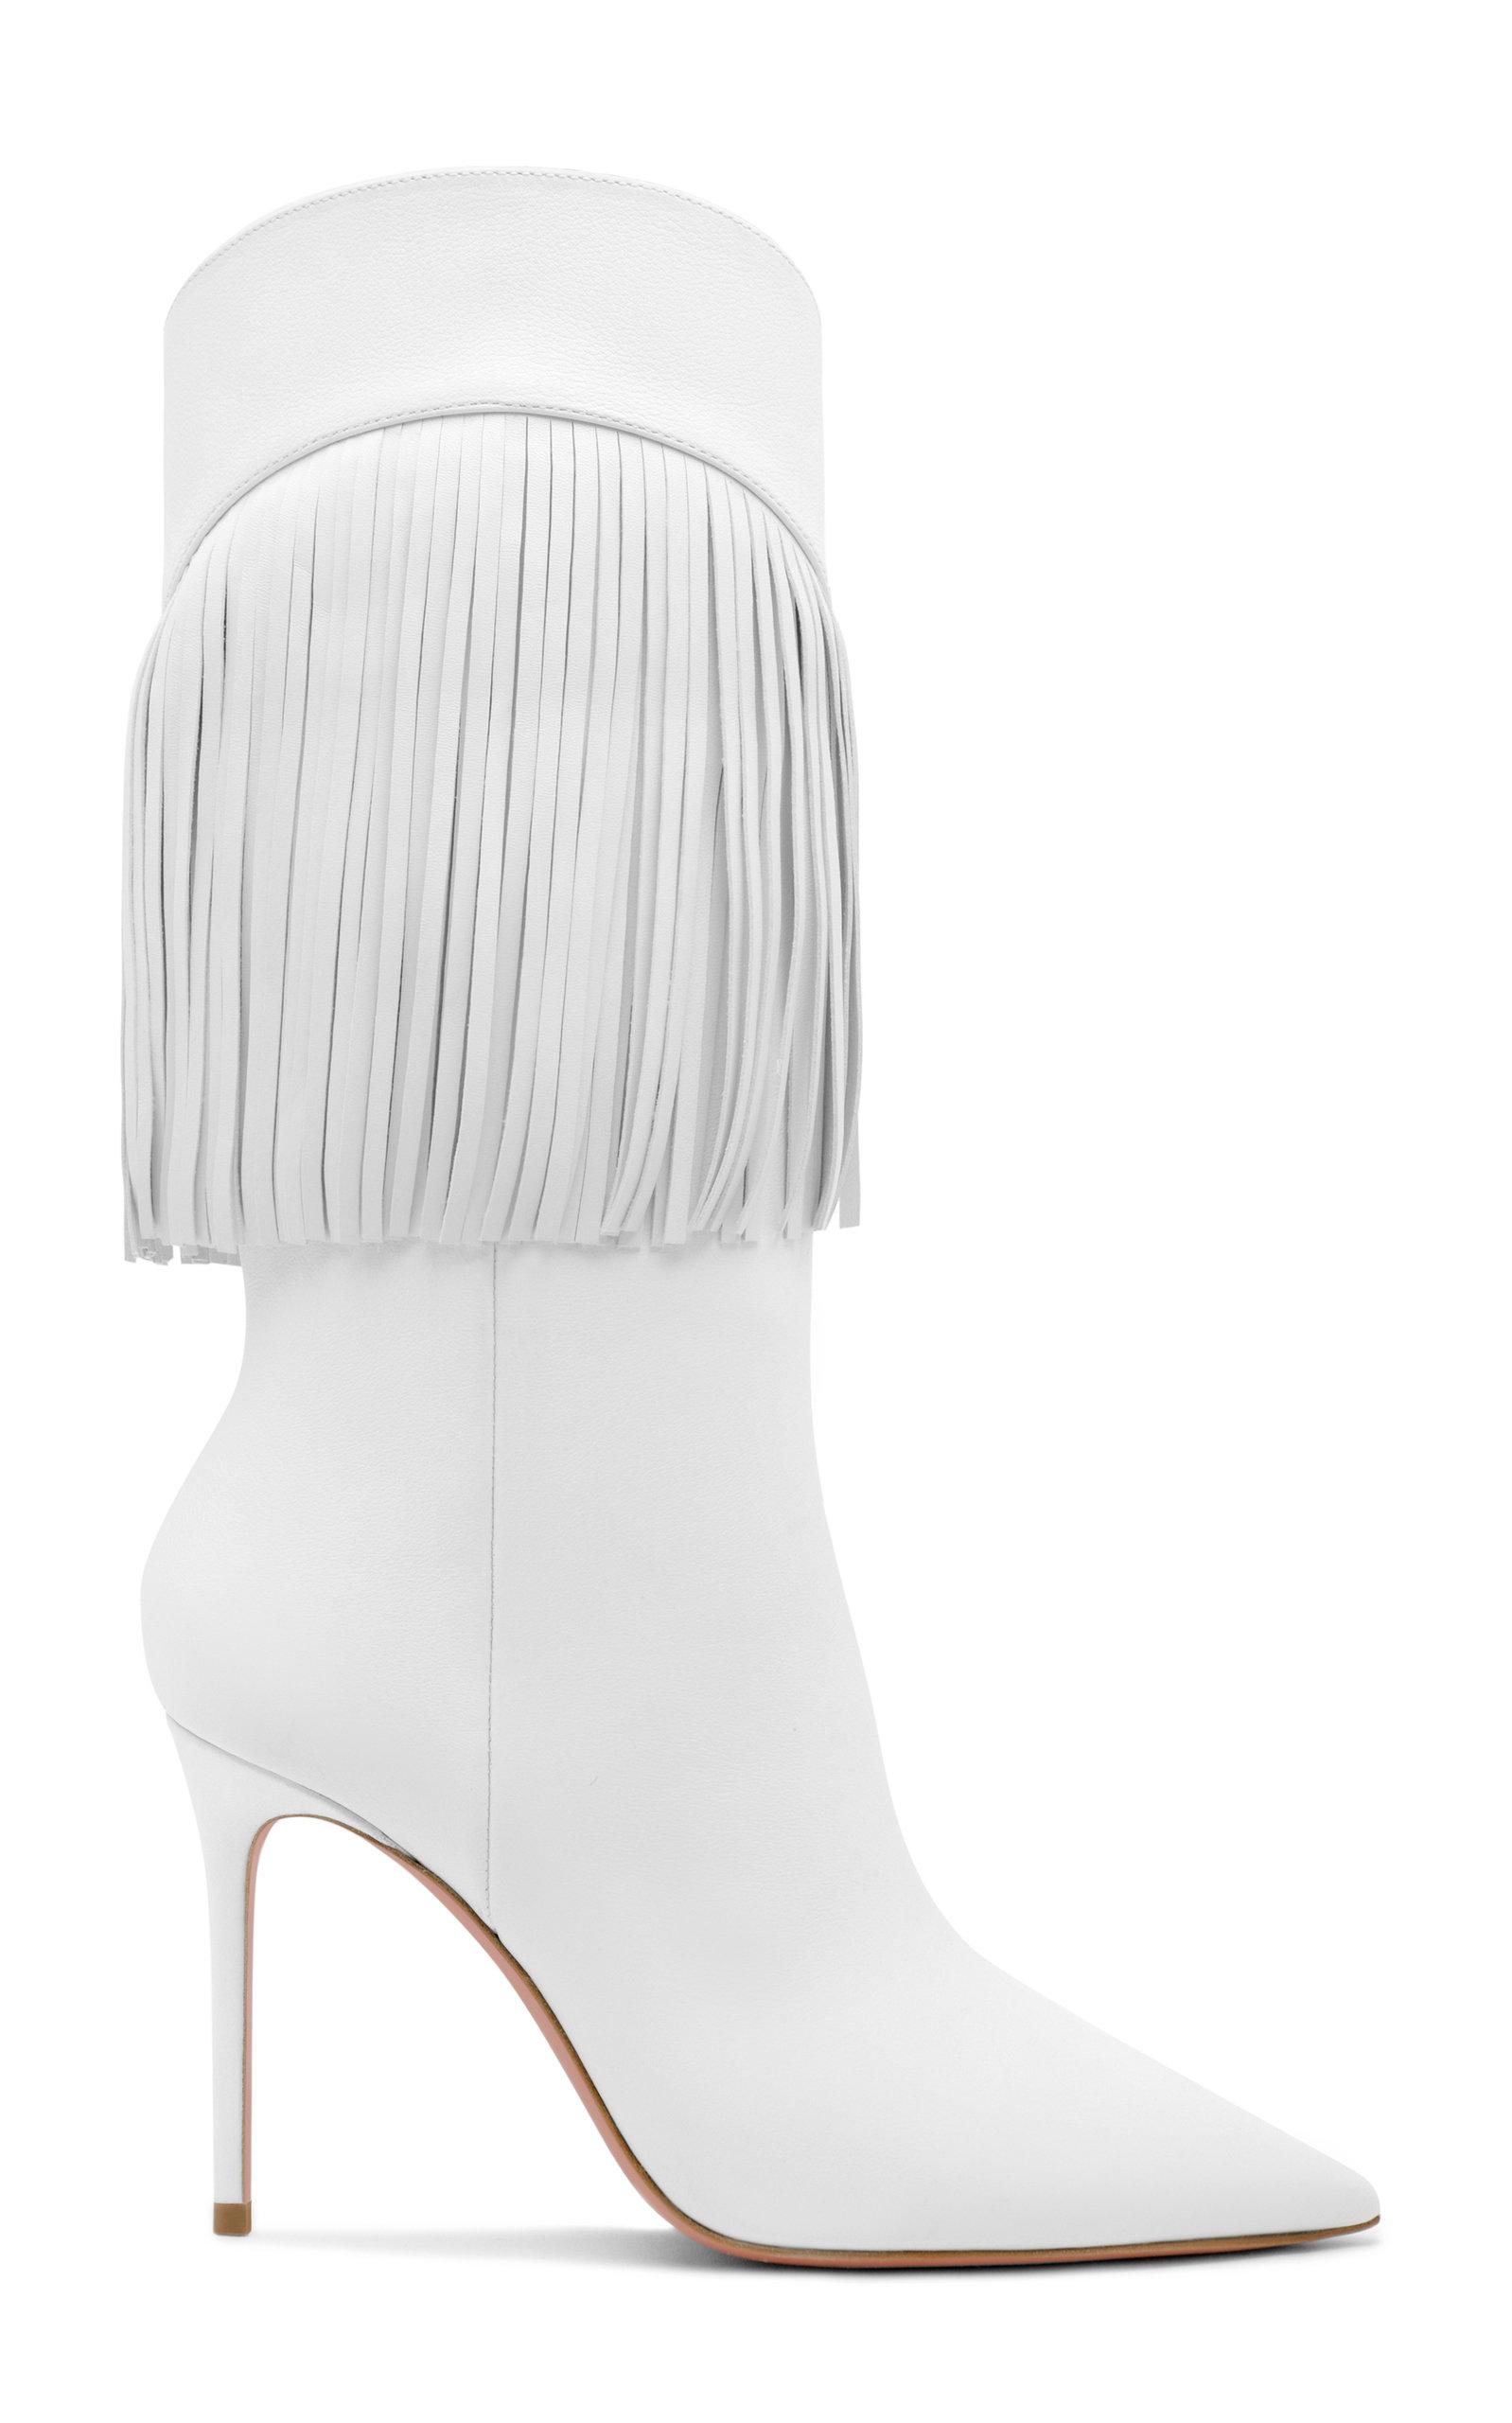 AMINA MUADDI Lily Fringed Leather Boots in White | Lyst